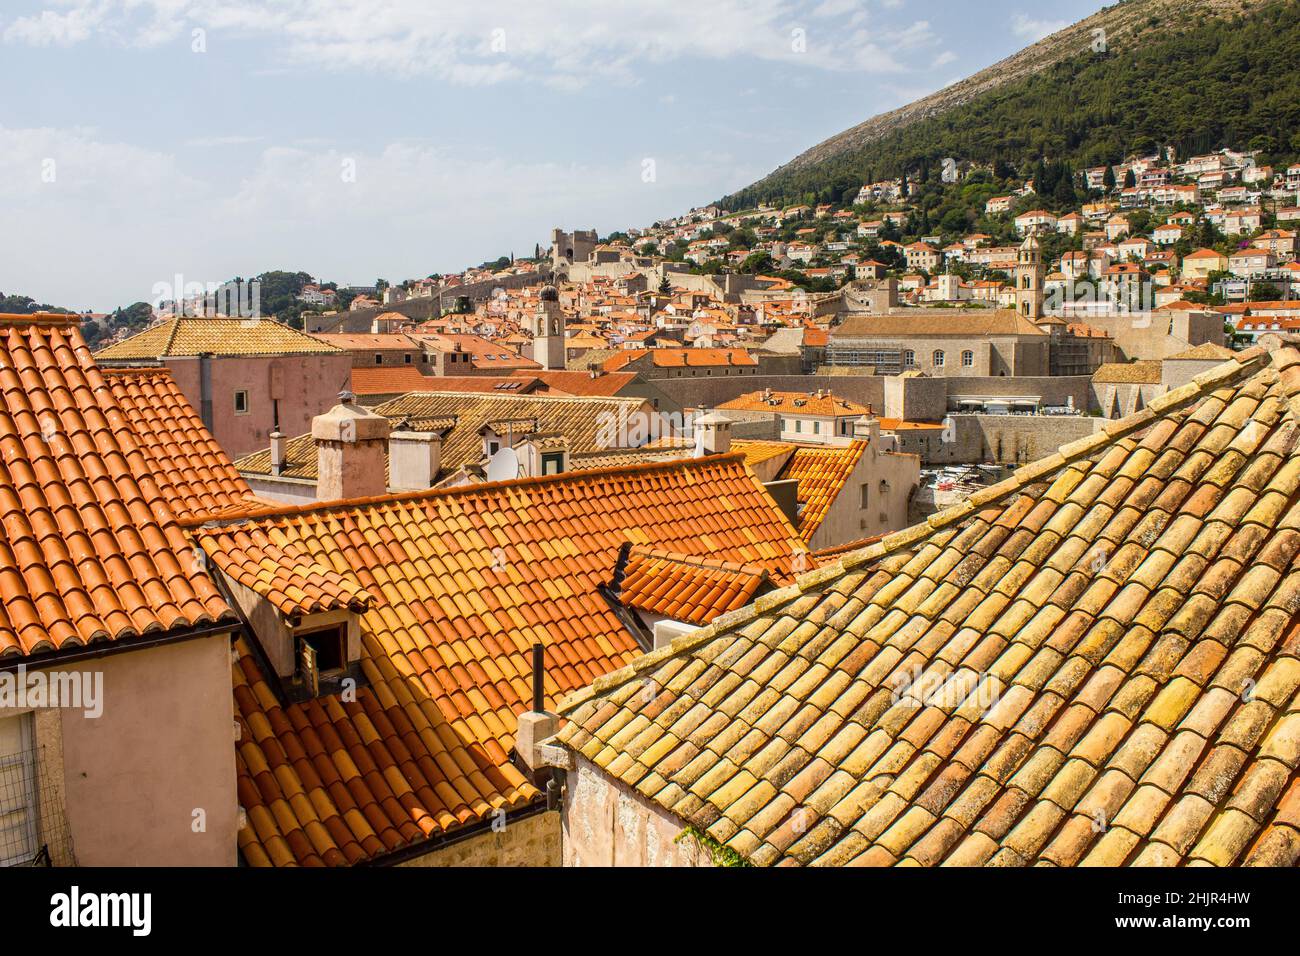 View of Traditional Colorful Rooftops of Dubrovnik with Minceta Tower and City Walls in the Background Stock Photo